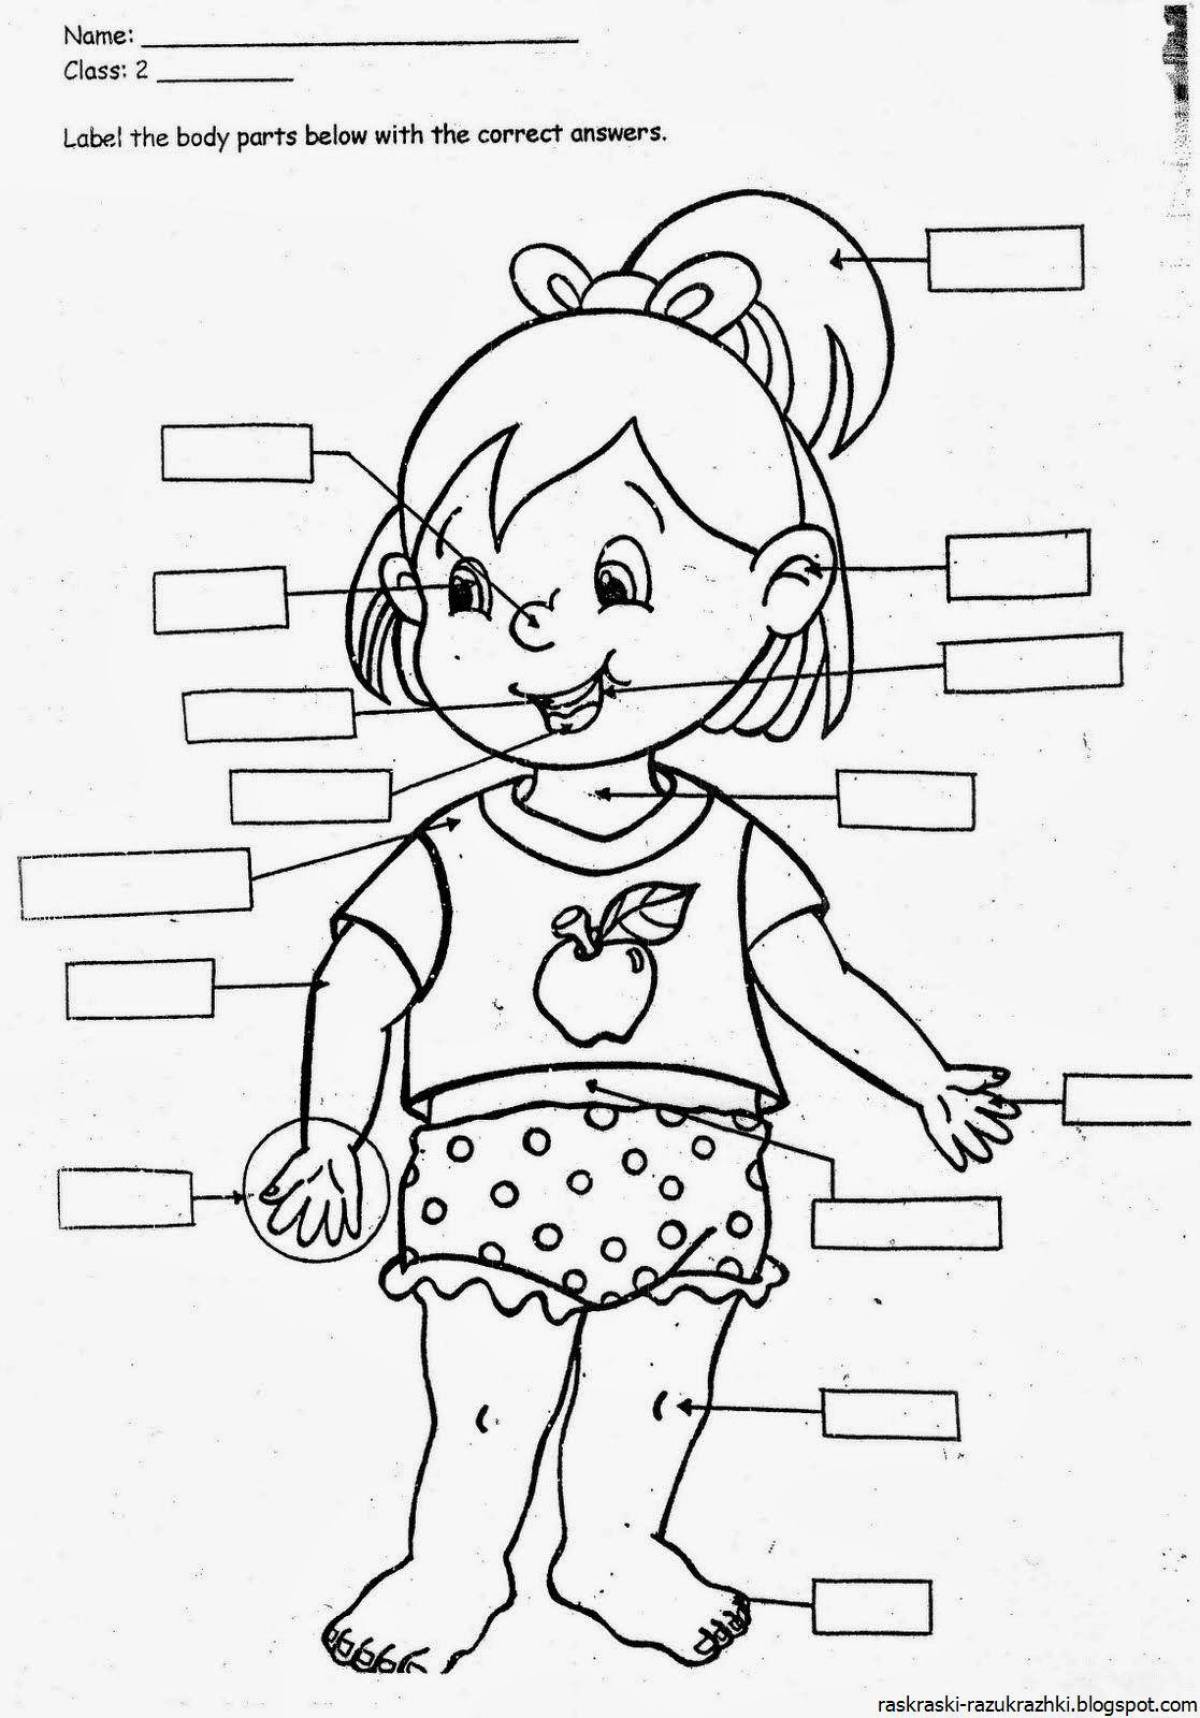 Colourful man coloring book for kids